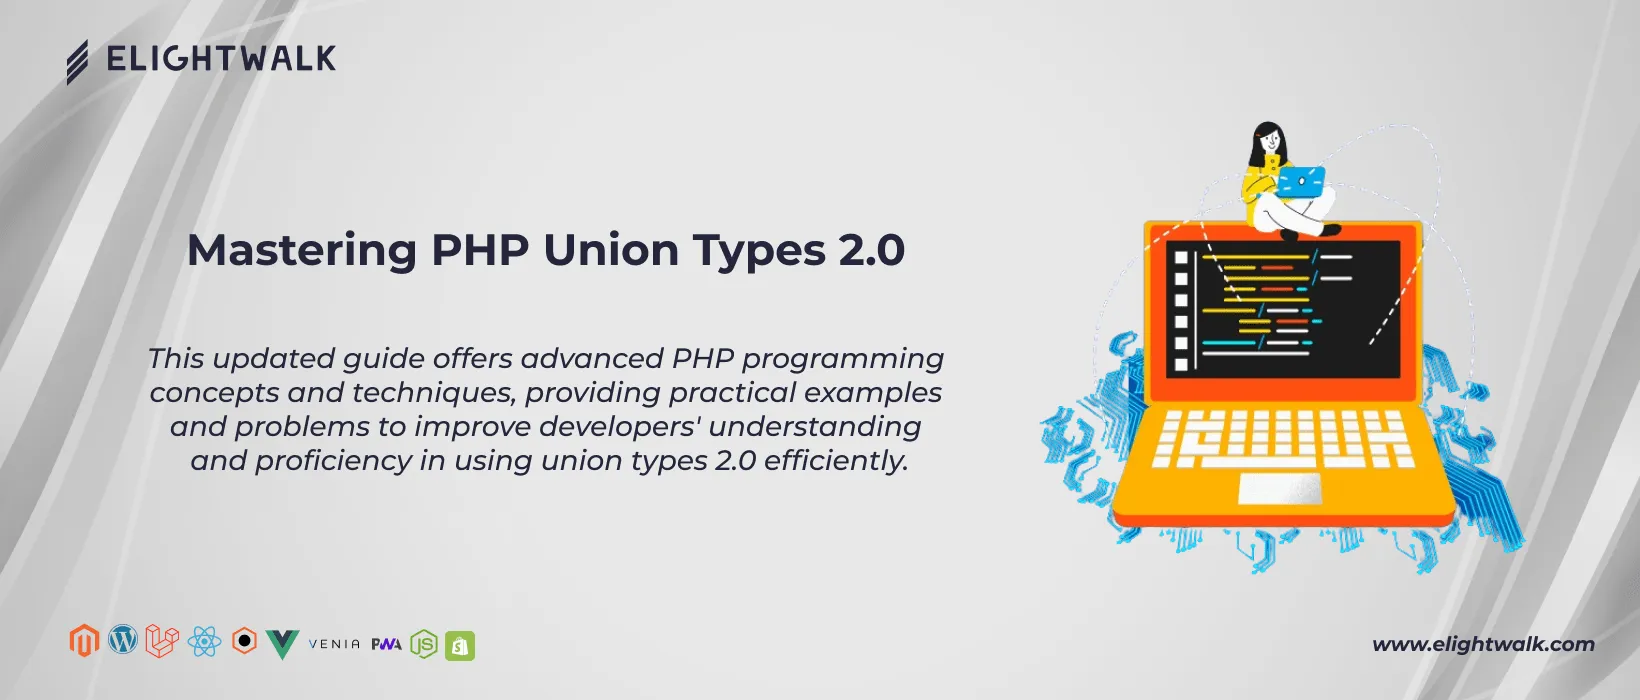 Mastering PHP Union Types 